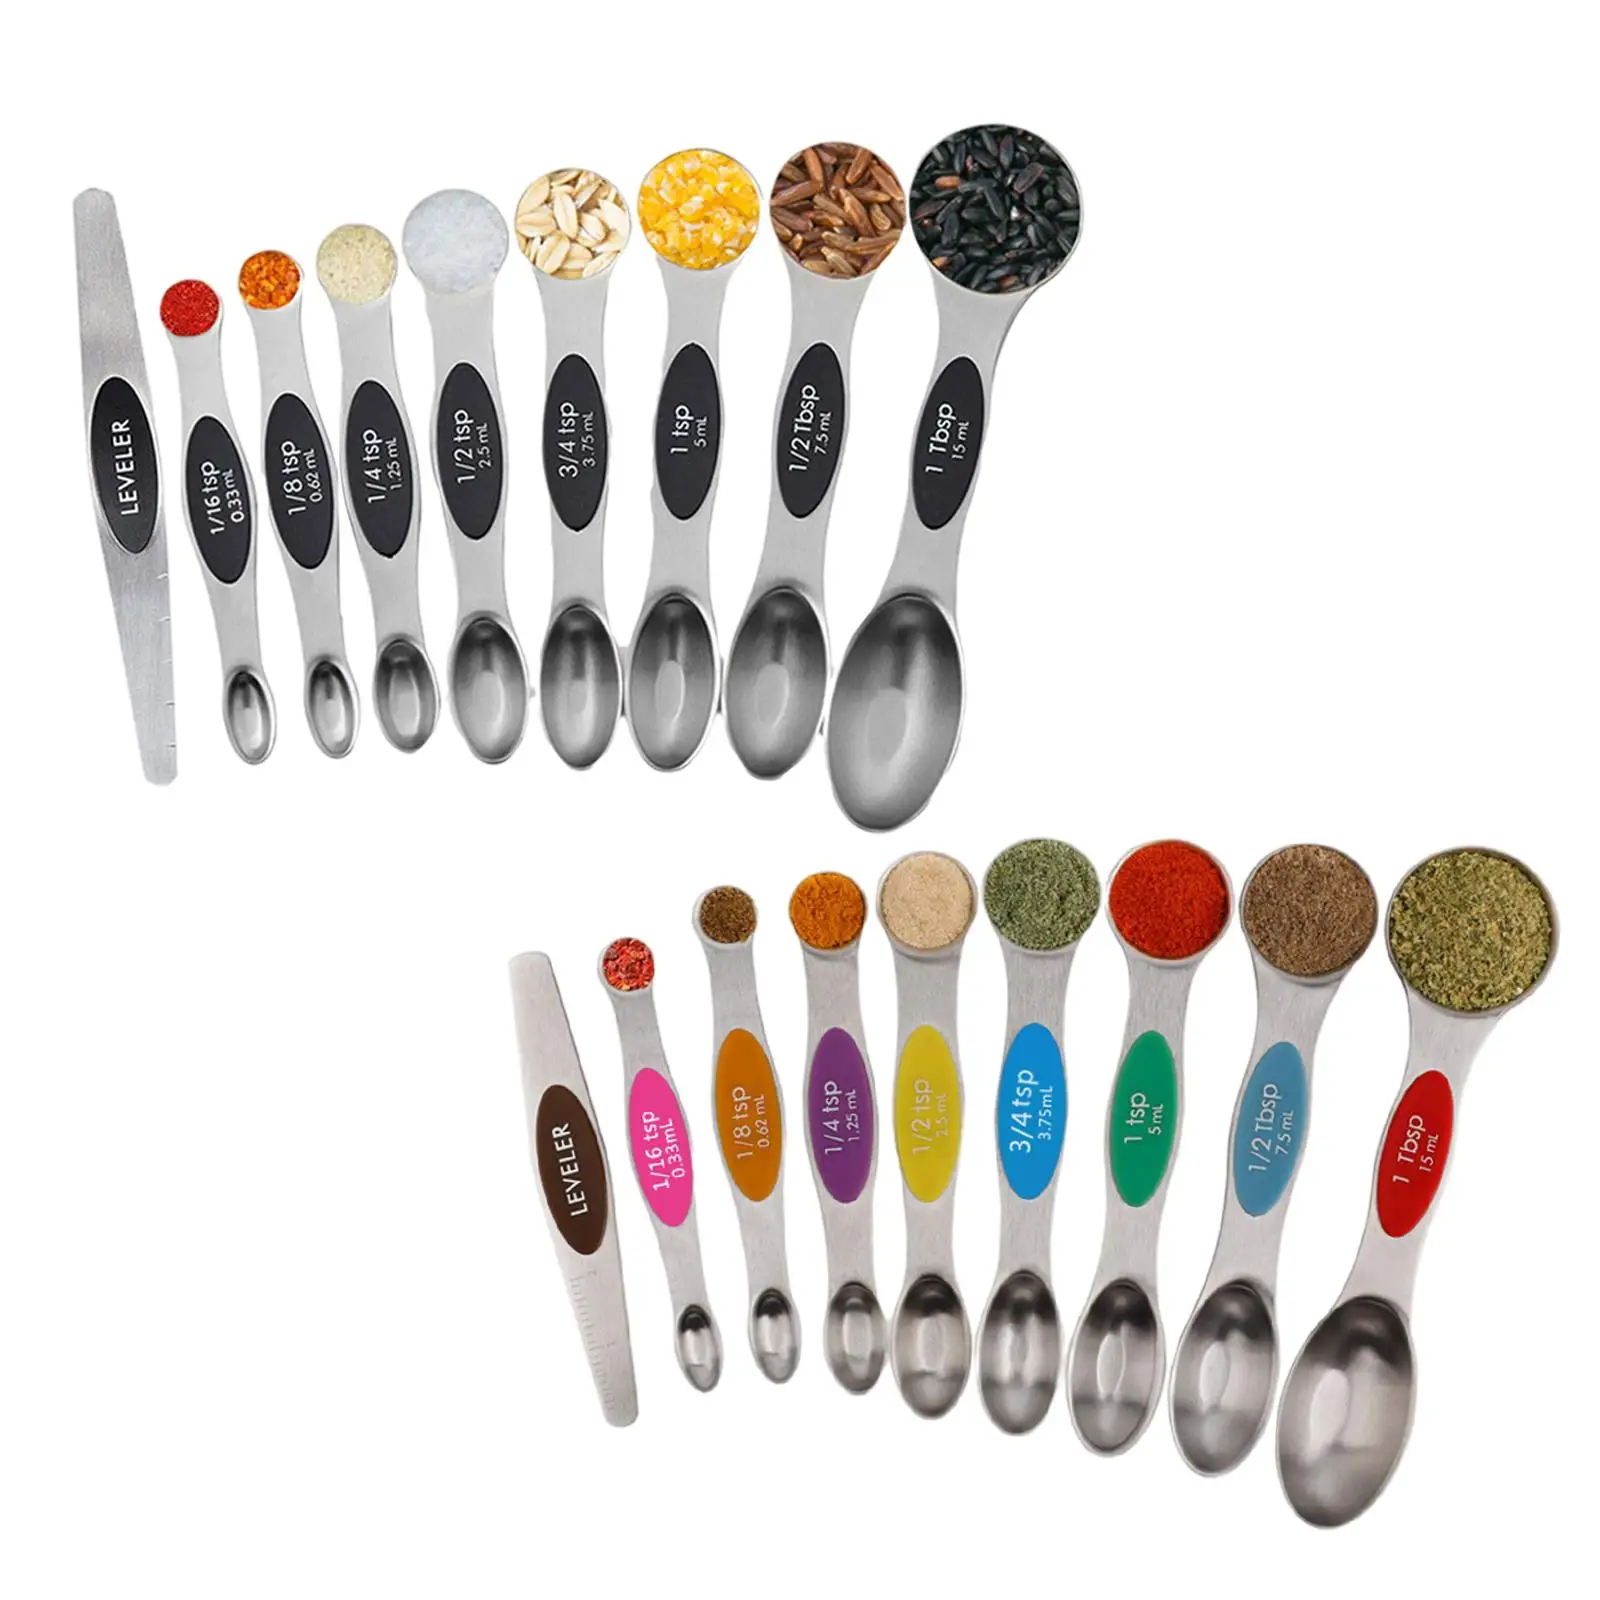 9 Pieces  Measuring Spoons Stainless Steel d Stackable Teaspoon for Measuring Dry and Liquid, Fit for Spice Jars